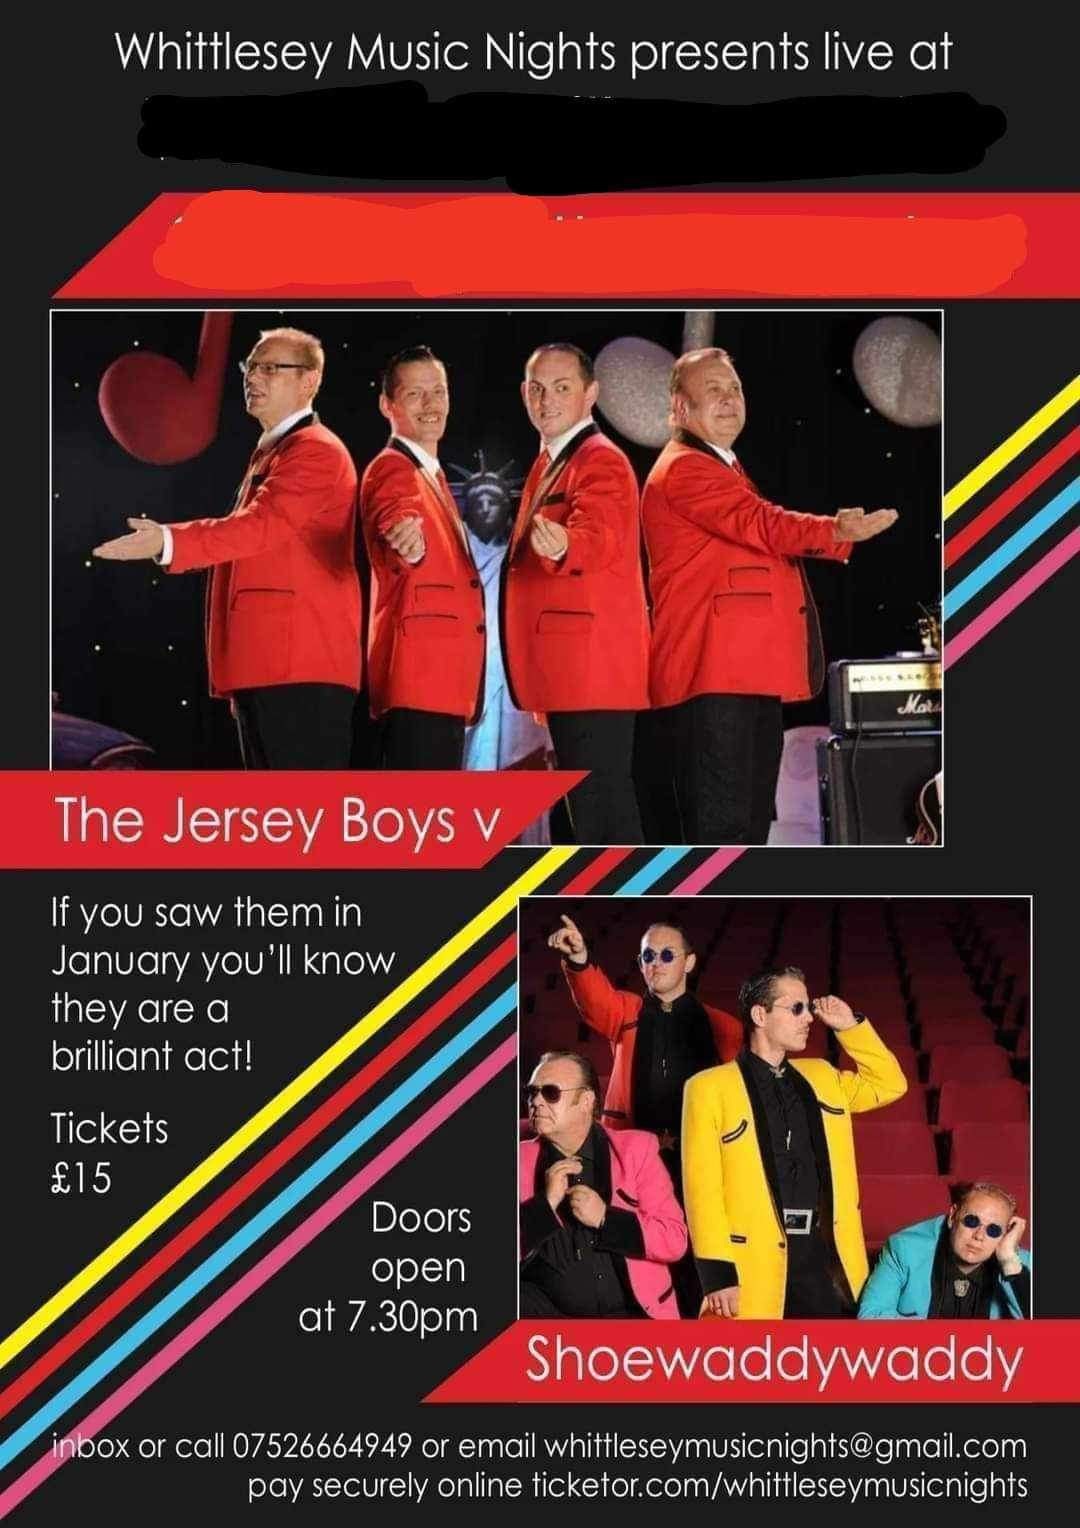 Jersey Boys v Shoewaddywaddy  on May 25, 19:30@Childers Sports and Social Club - Buy tickets and Get information on whittlesey music nights 